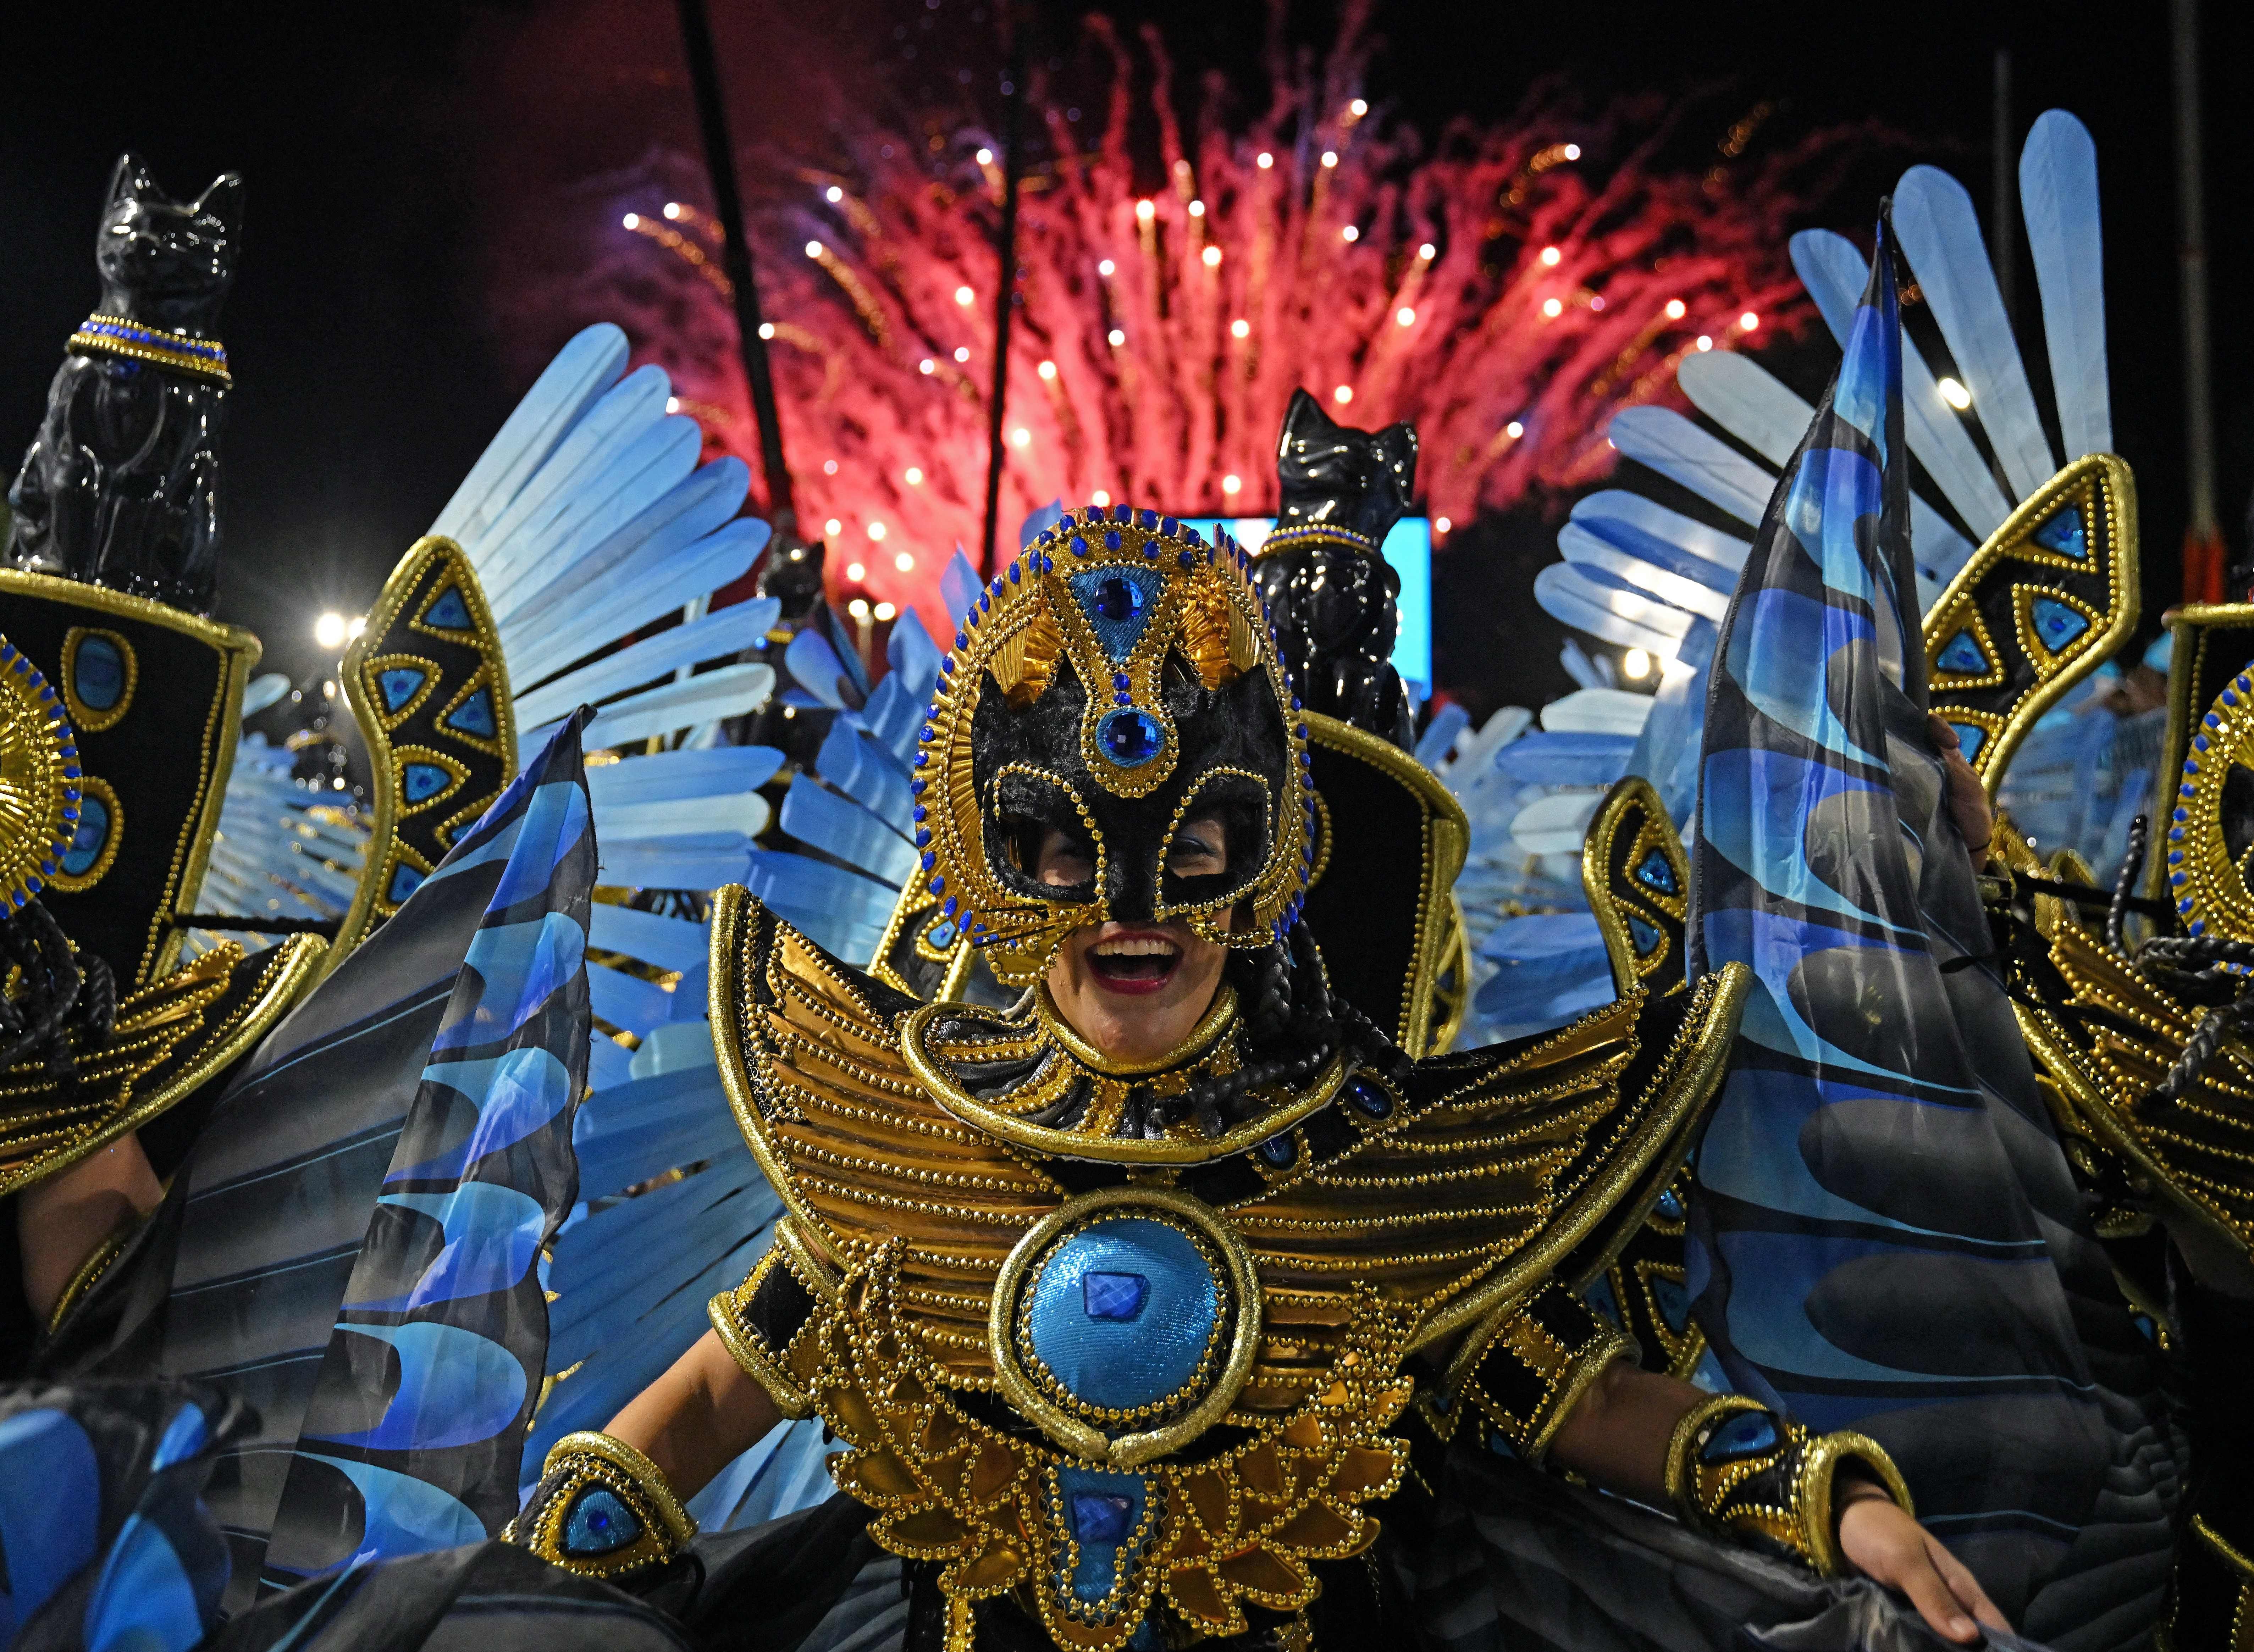 A woman smiles while dressed in an elaborate costume with gold and blue details and blue wings